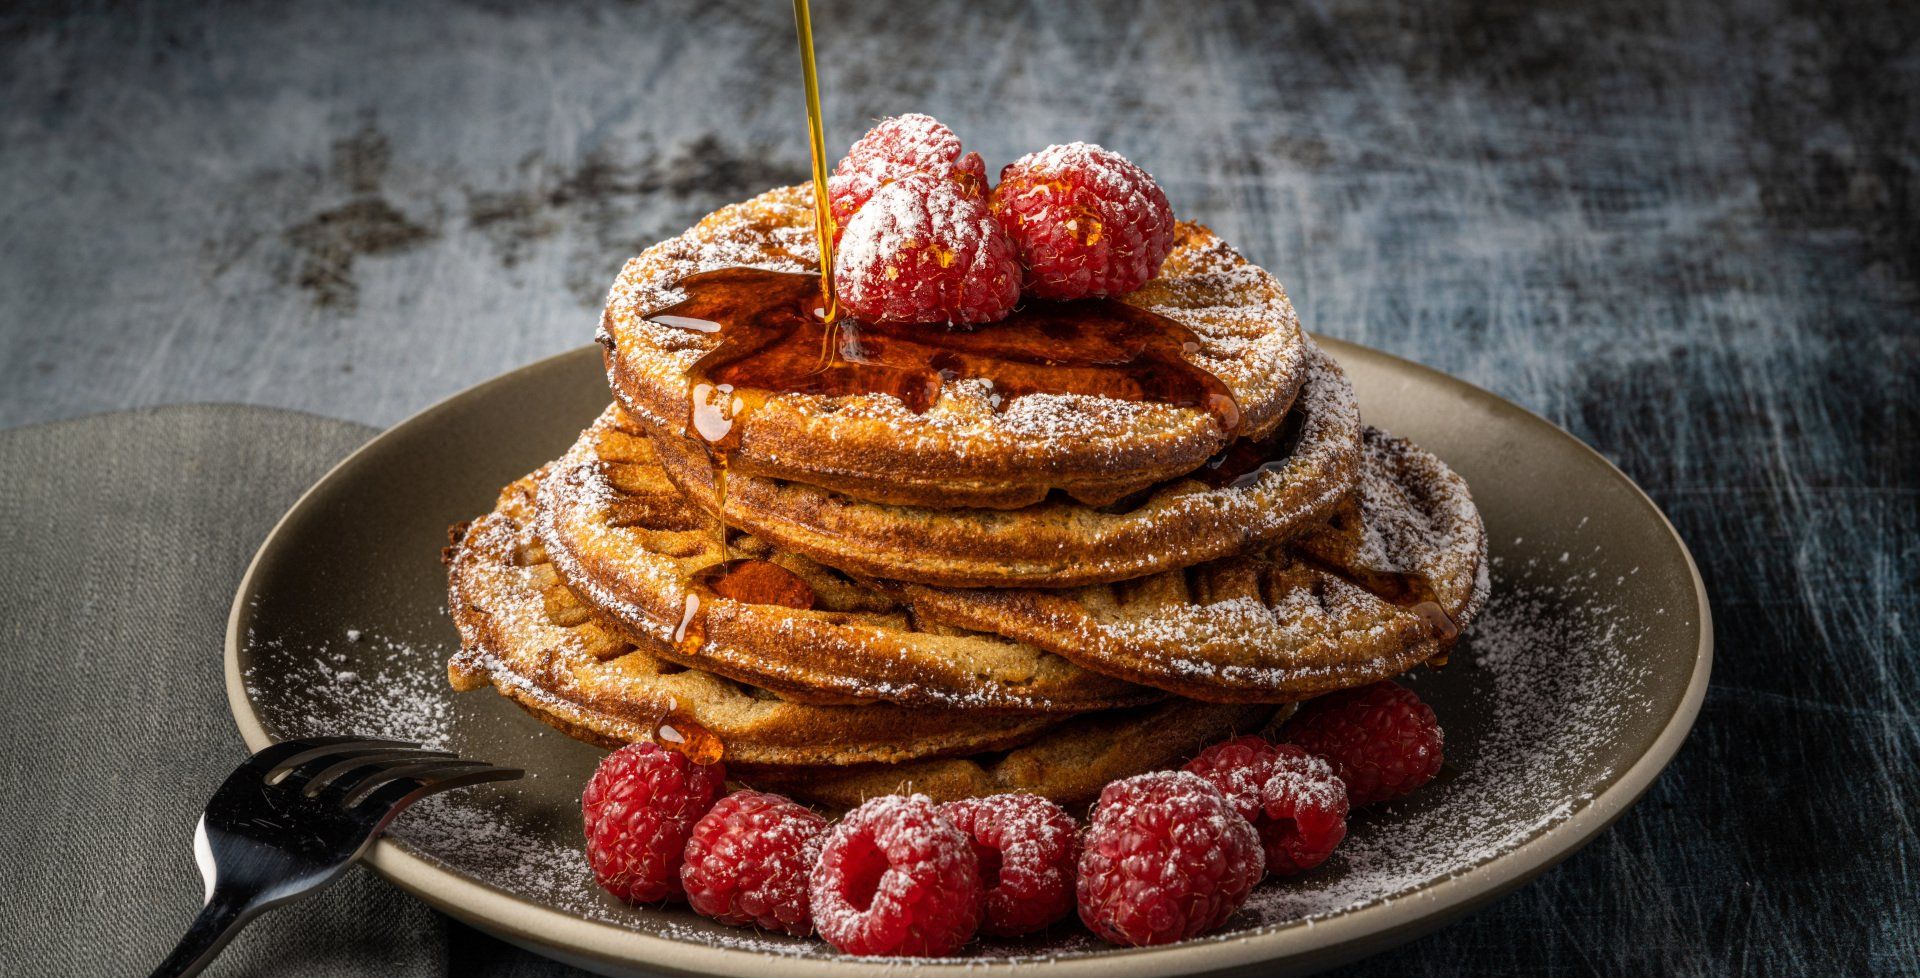 Delicious pancakes covered in raspberries and powdered sugar with syrup